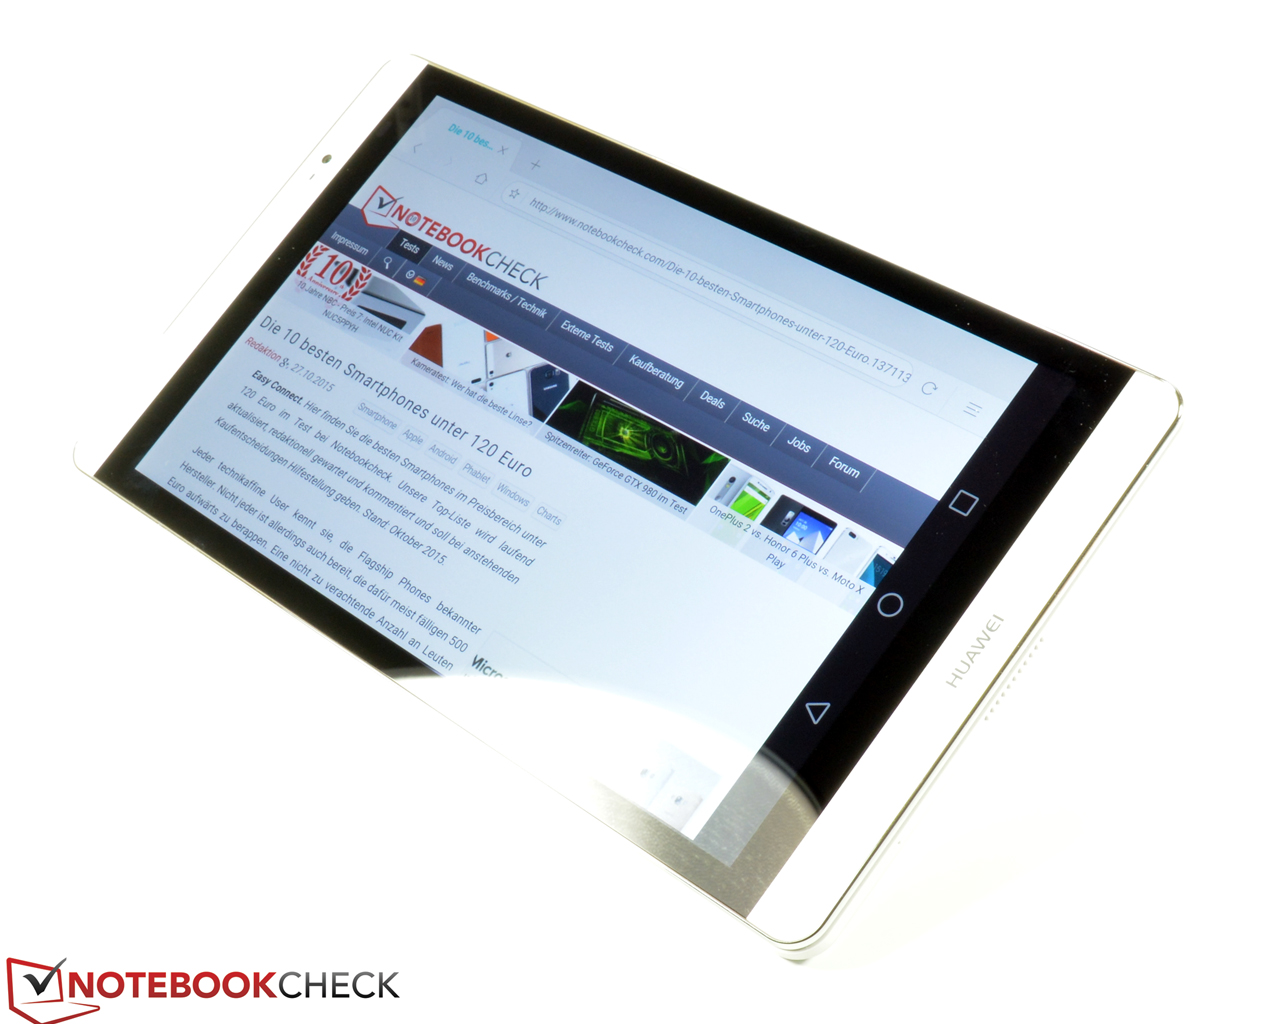 Huawei MediaPad M2 Tablet Review - NotebookCheck.net Reviews